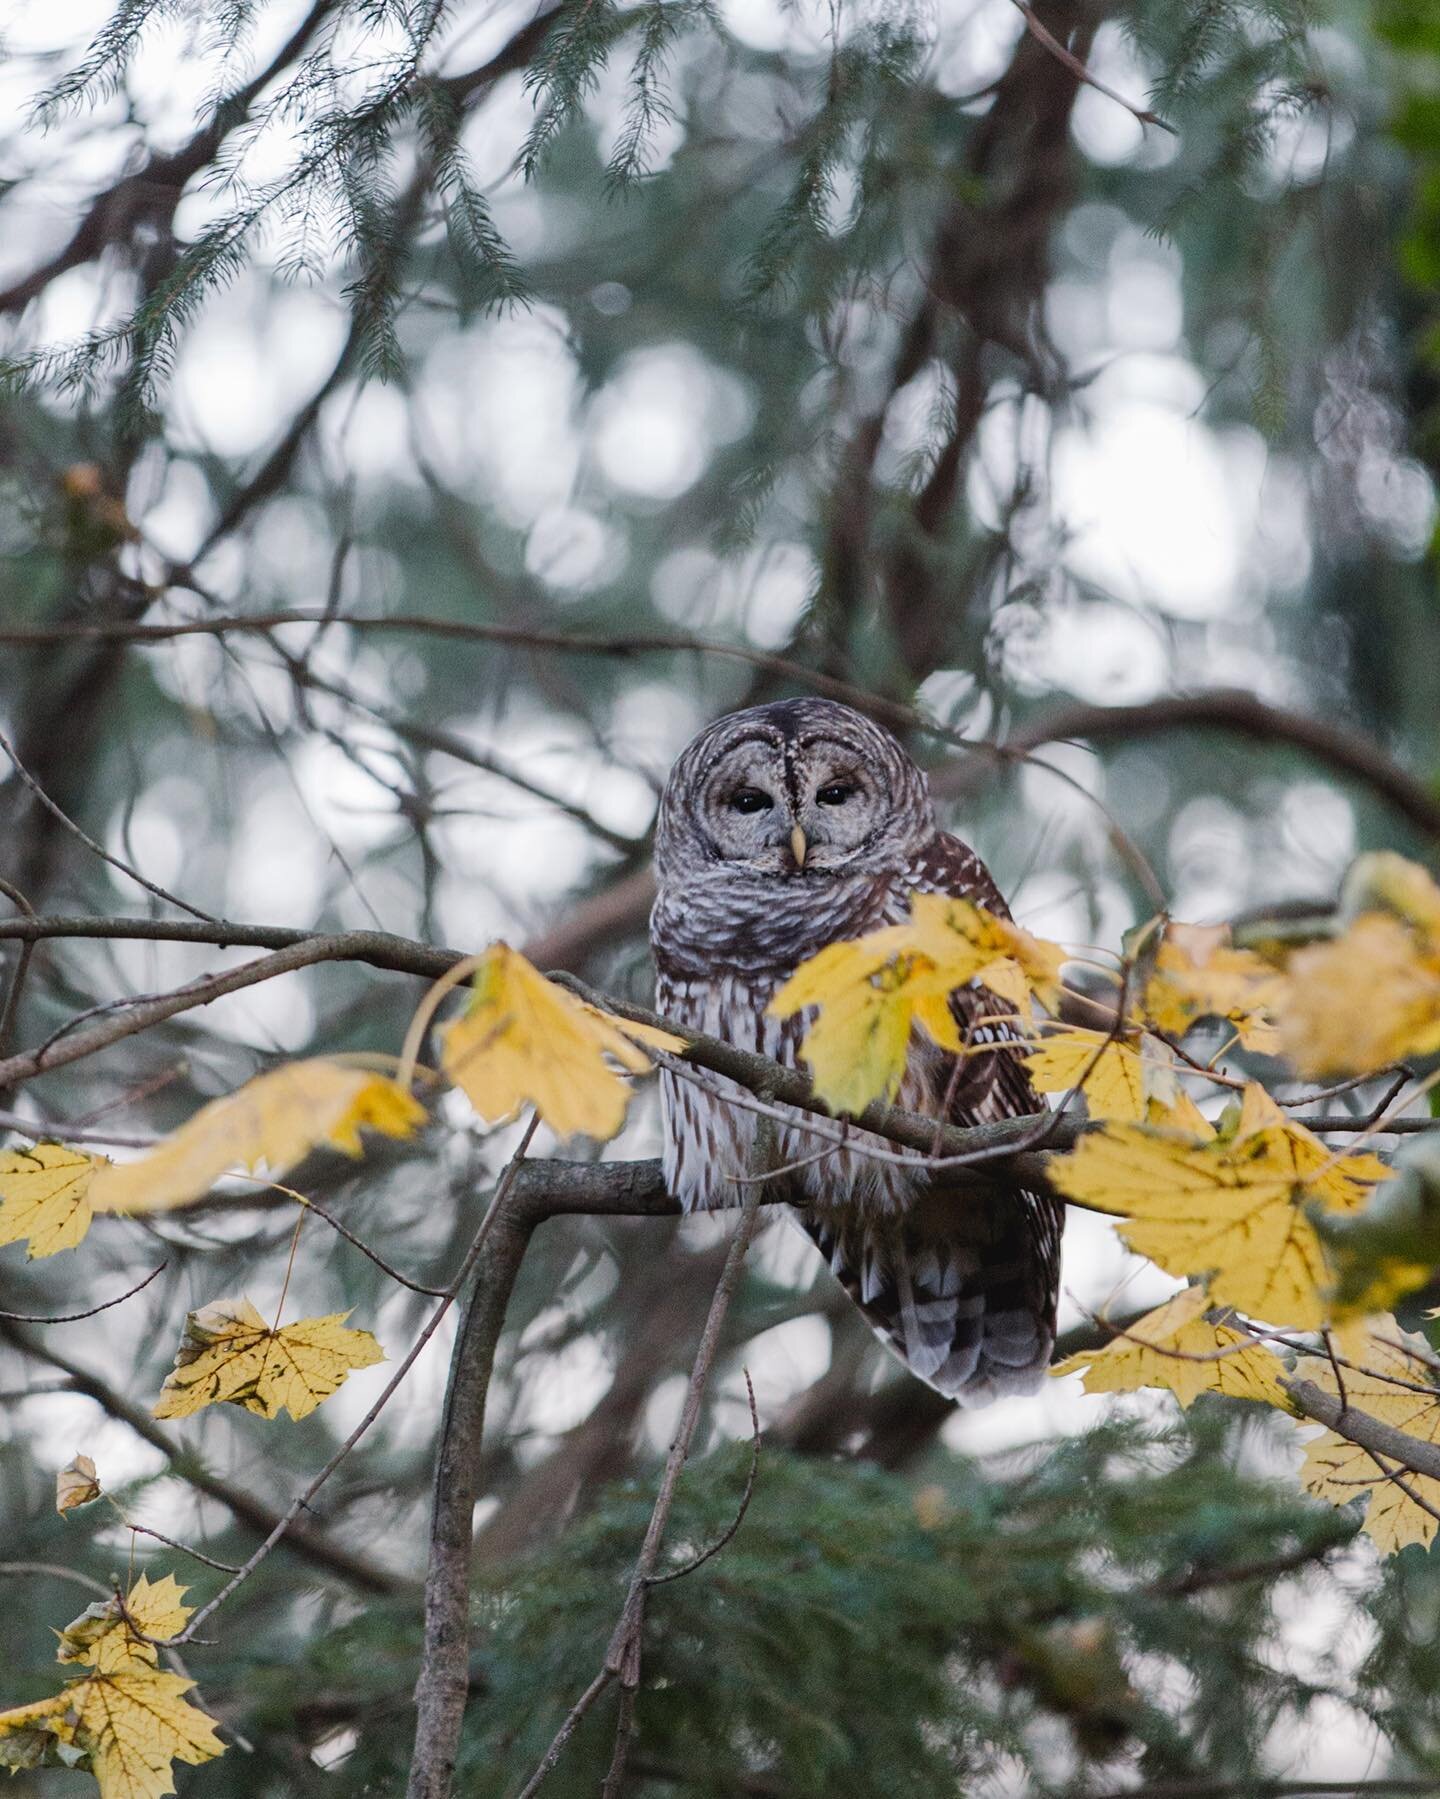 Happy new year from this owl that lives in the woods behind my studio. Please tell me everything I need to know about barred owls!! Should we build it a nesting box and hope for cute little owl babies?🦉